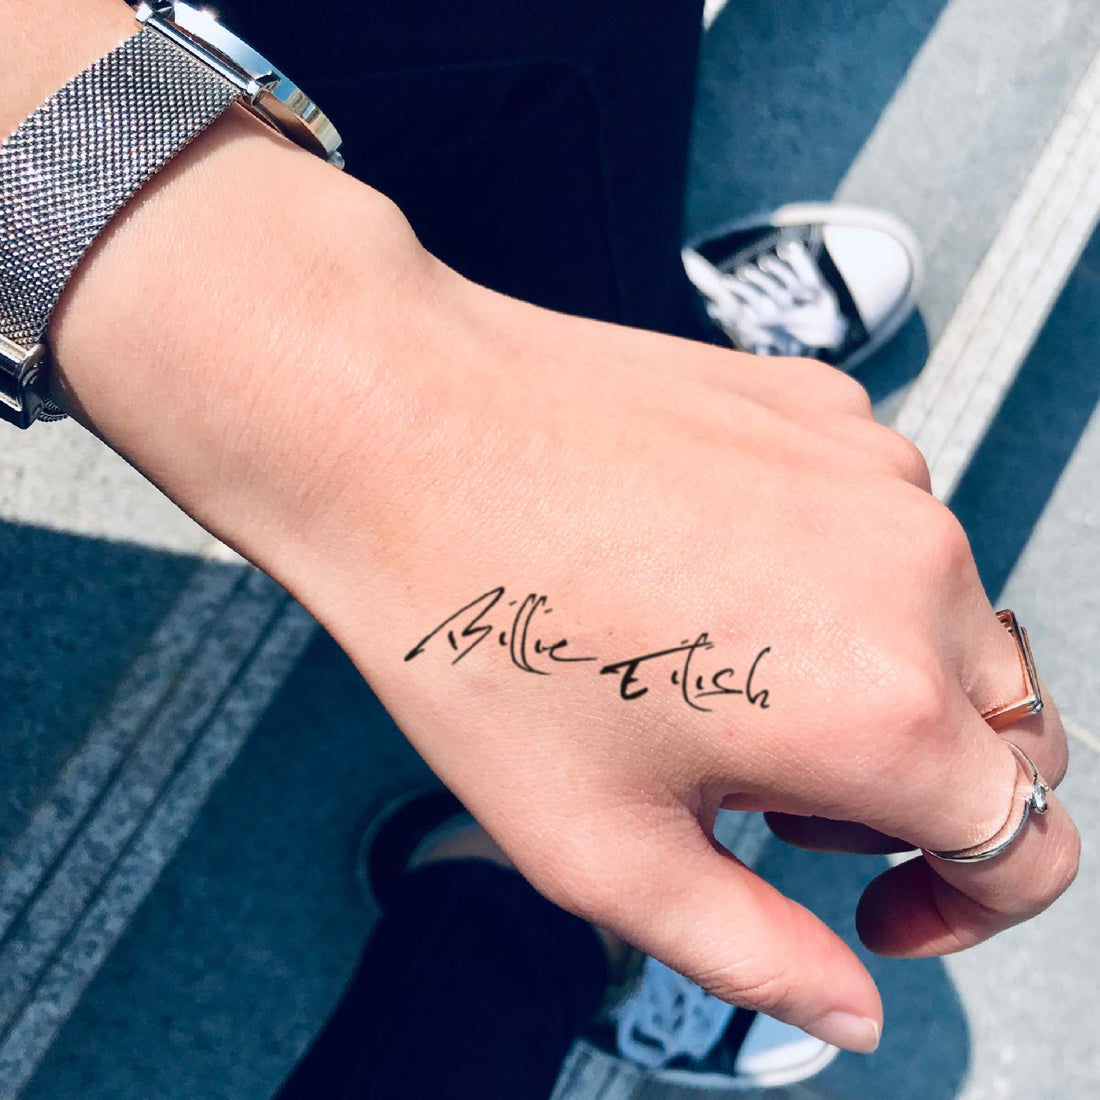 Billie Eilish custom temporary tattoo sticker design idea inspiration meanings removal arm wrist hand words font name signature calligraphy lyrics tour concert outfits merch accessory gift souvenir costumes wear dress up code